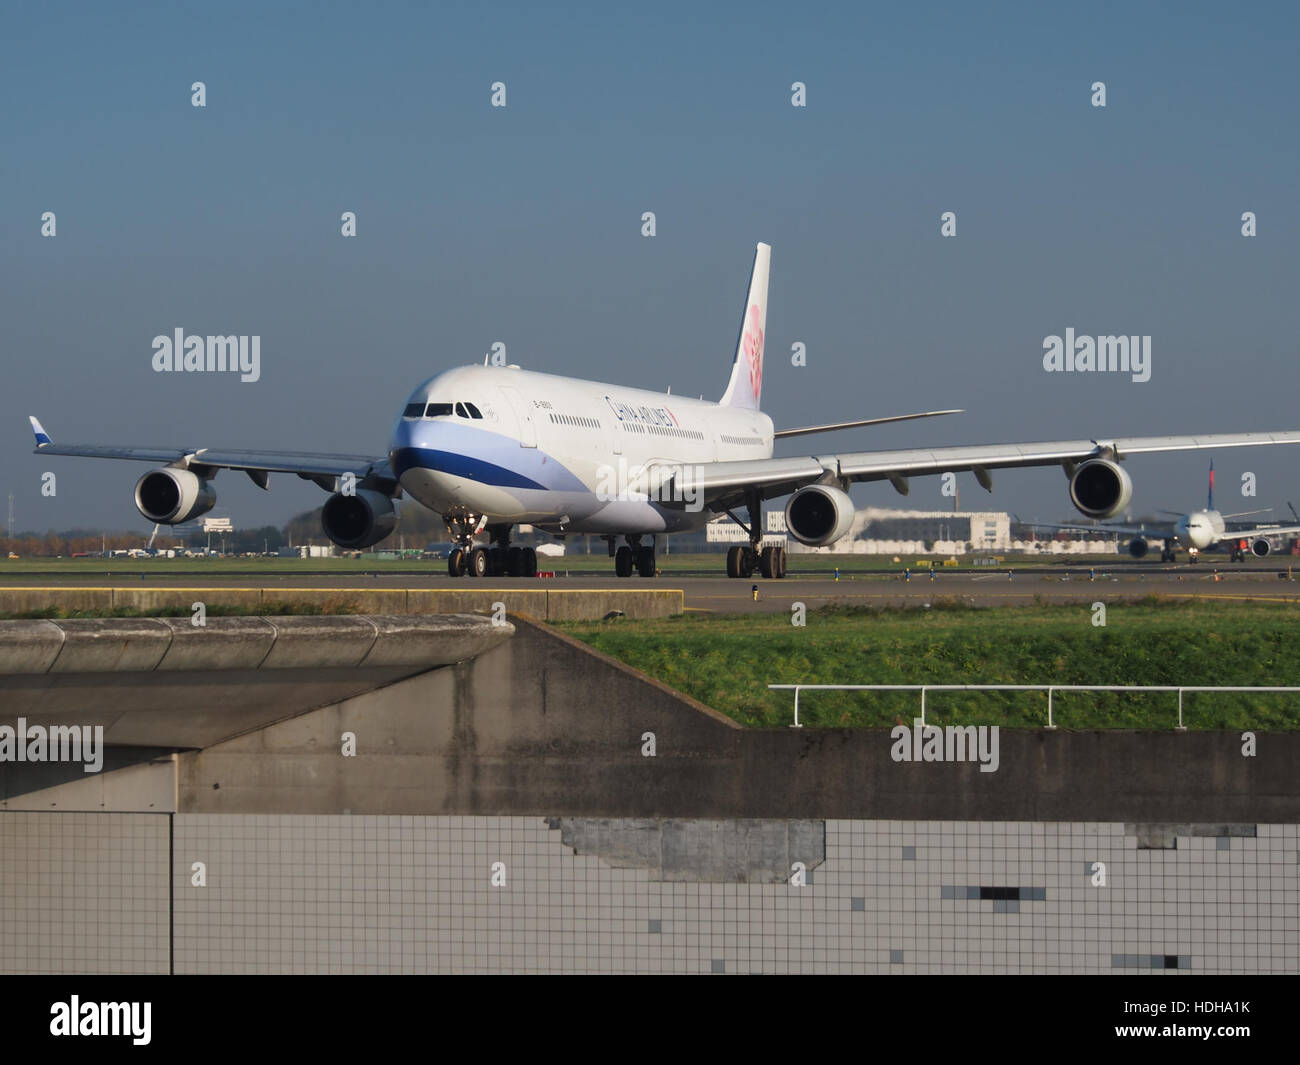 B-18805 (Flugzeuge) China Airlines Airbus A340-313 - Cn 415 am Schiphol pic1 Stockfoto